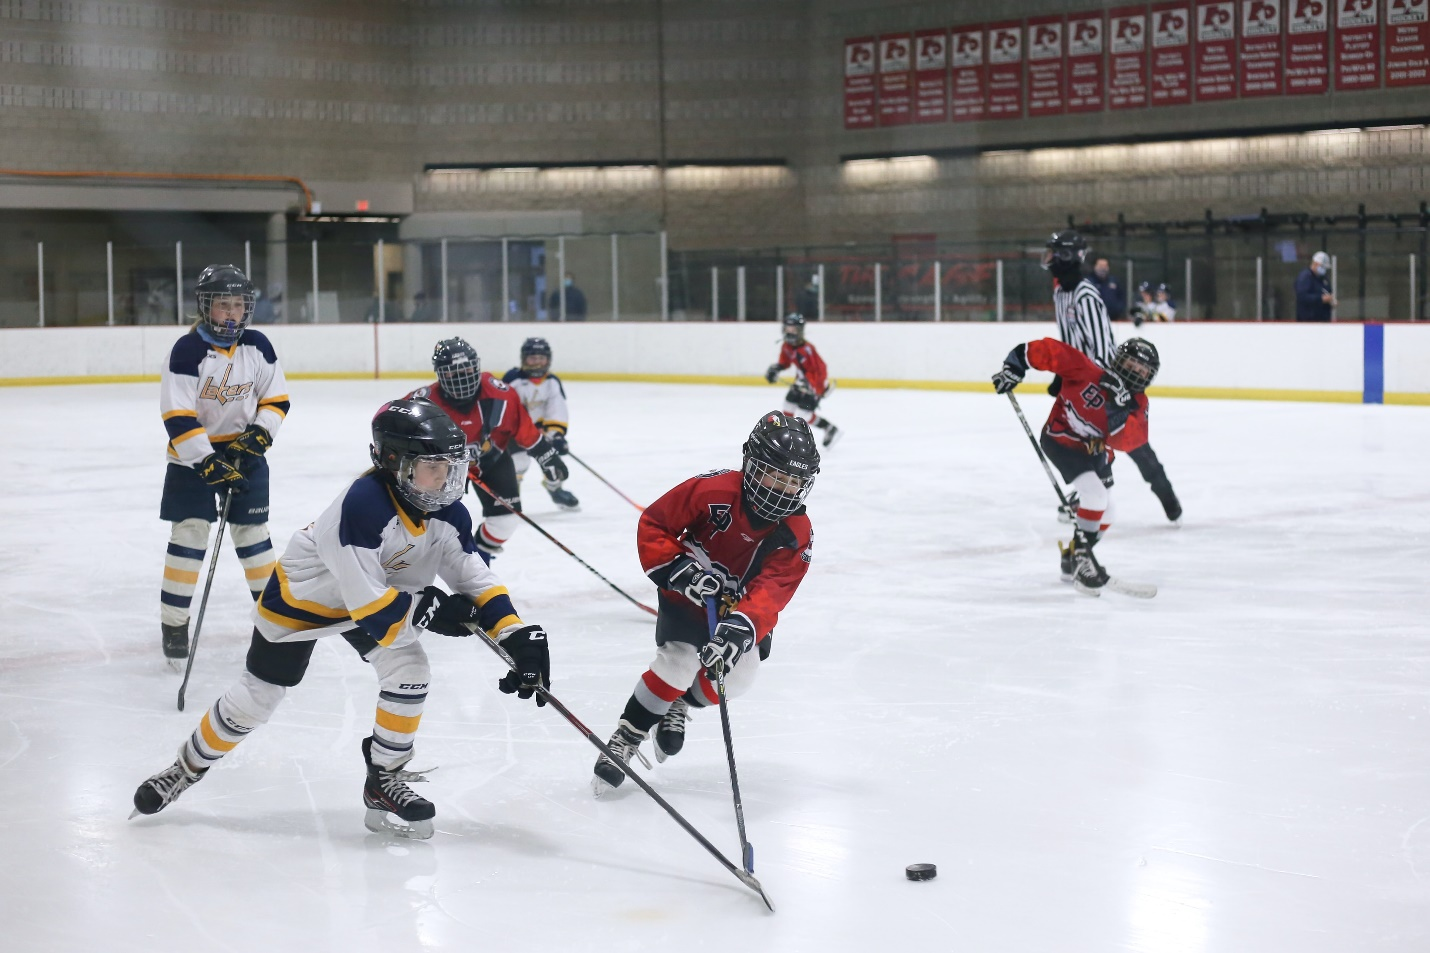 Two teams playing ice hockey